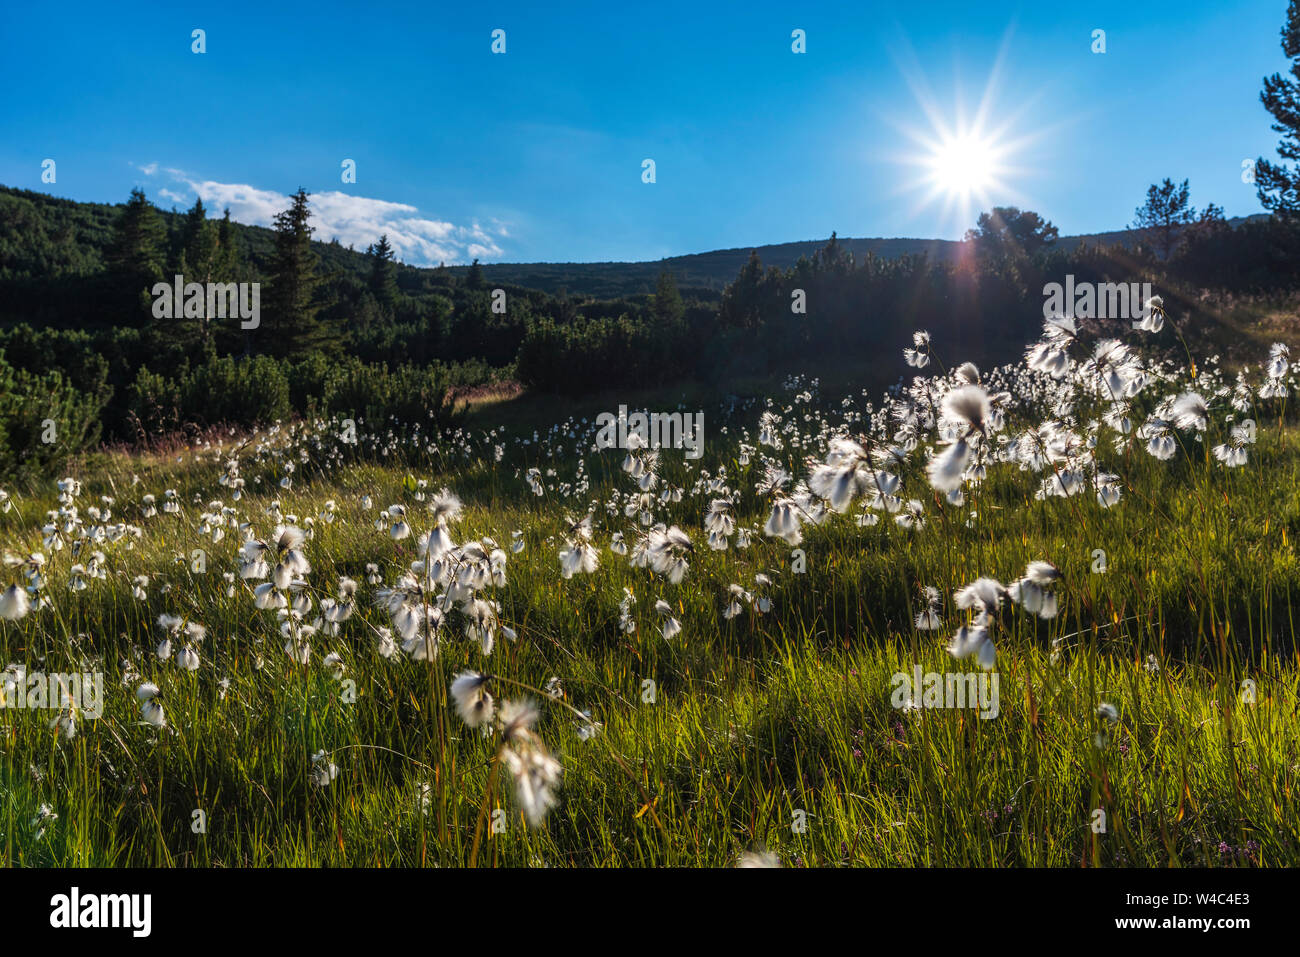 Gentle landscape during sunset in the mountain with blooming arctic cotton grass Stock Photo